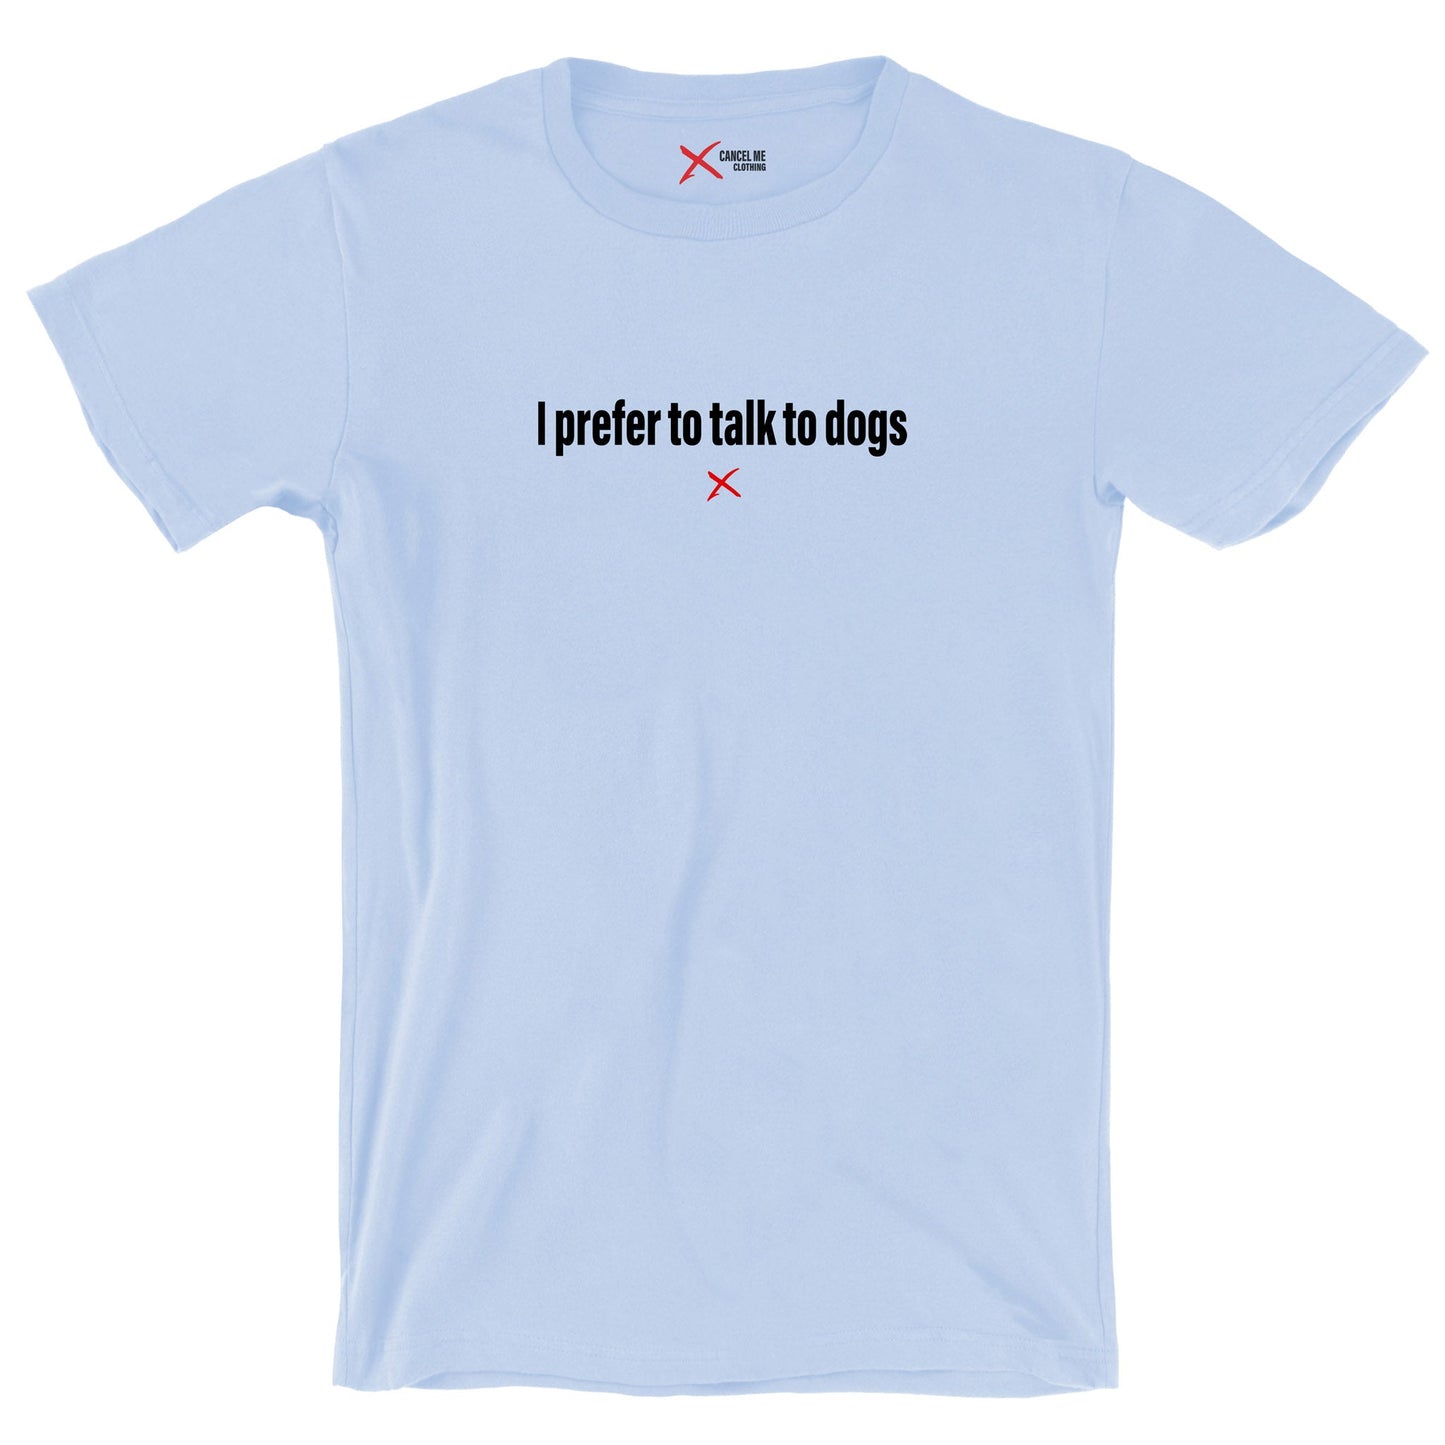 I prefer to talk to dogs - Shirt